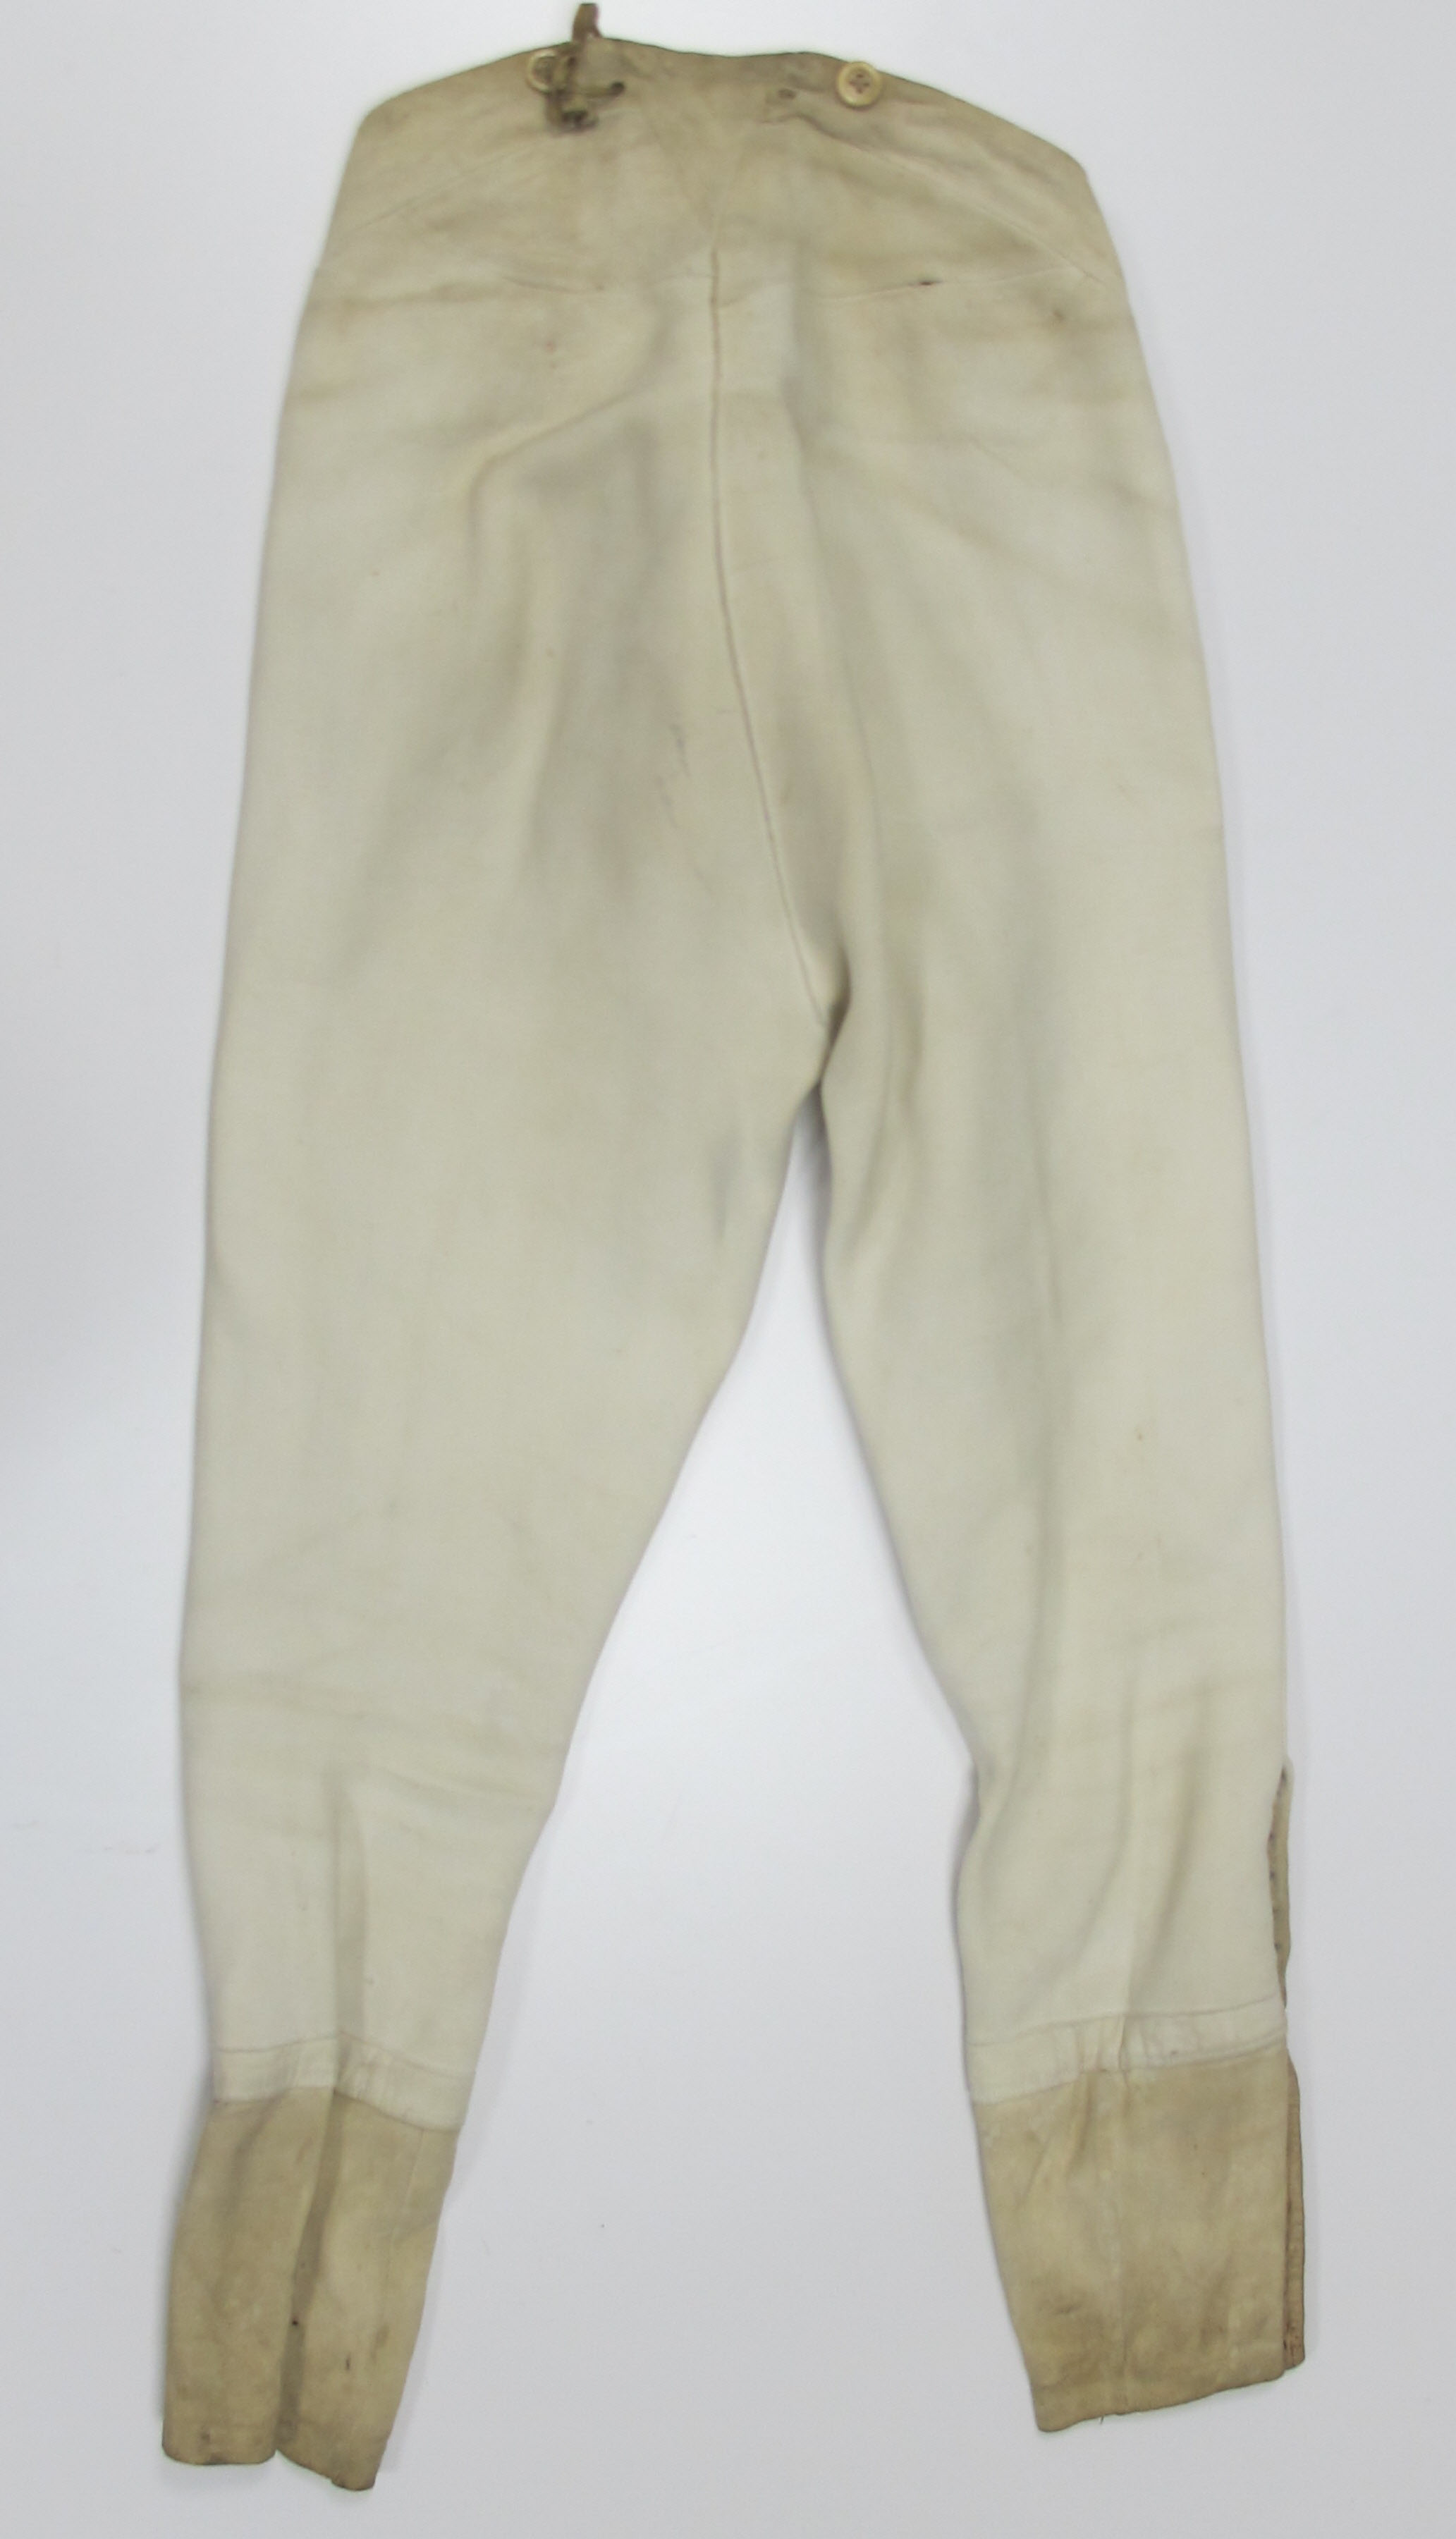 Woolen fly-front breeches (NG-2006-110-16) retrieved from a grave on